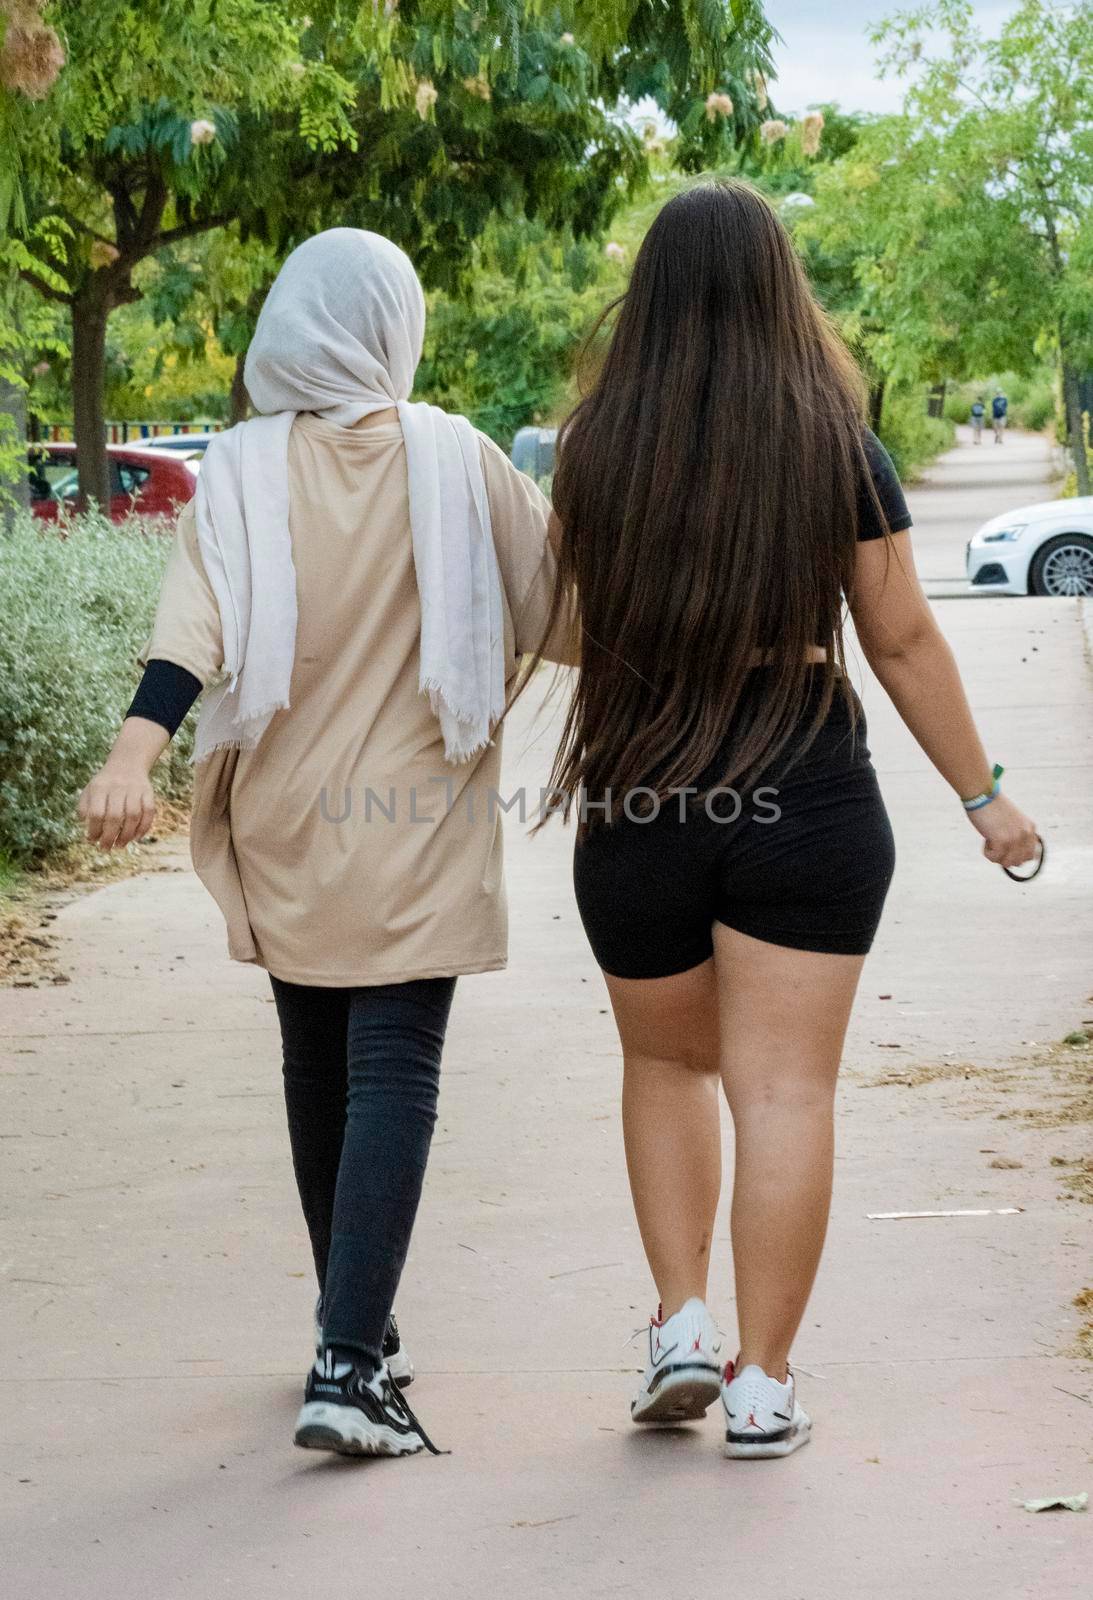 Arabic and european teen girls walking and enjoying time together in a park. Multicultural concept. by papatonic